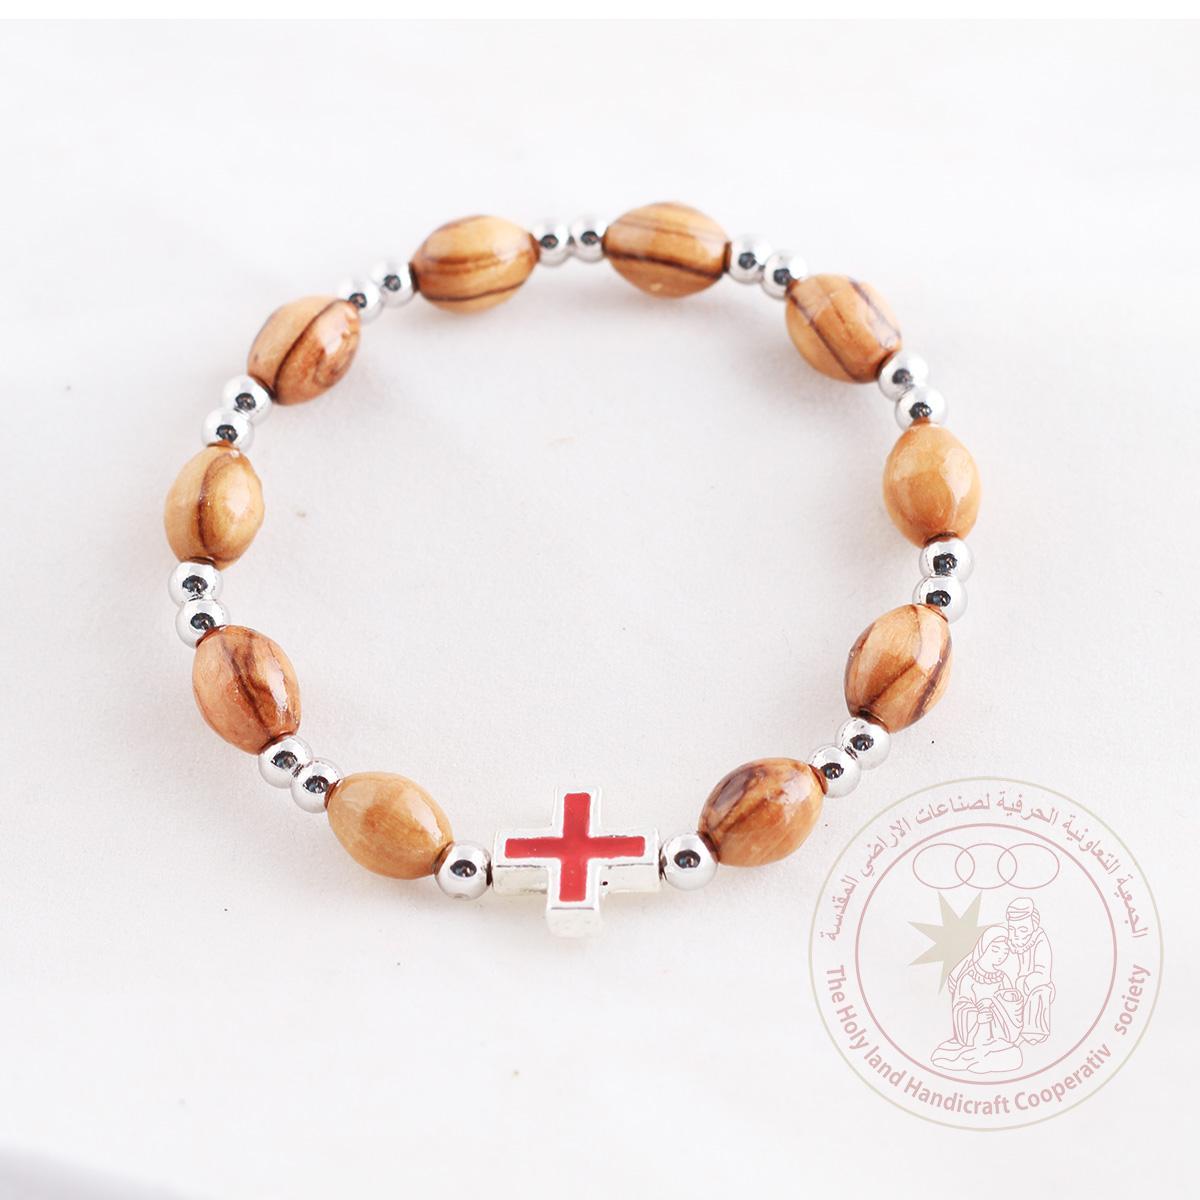 Authentic Olive Wood Oval beads bracelet, elastic cord and metal cross